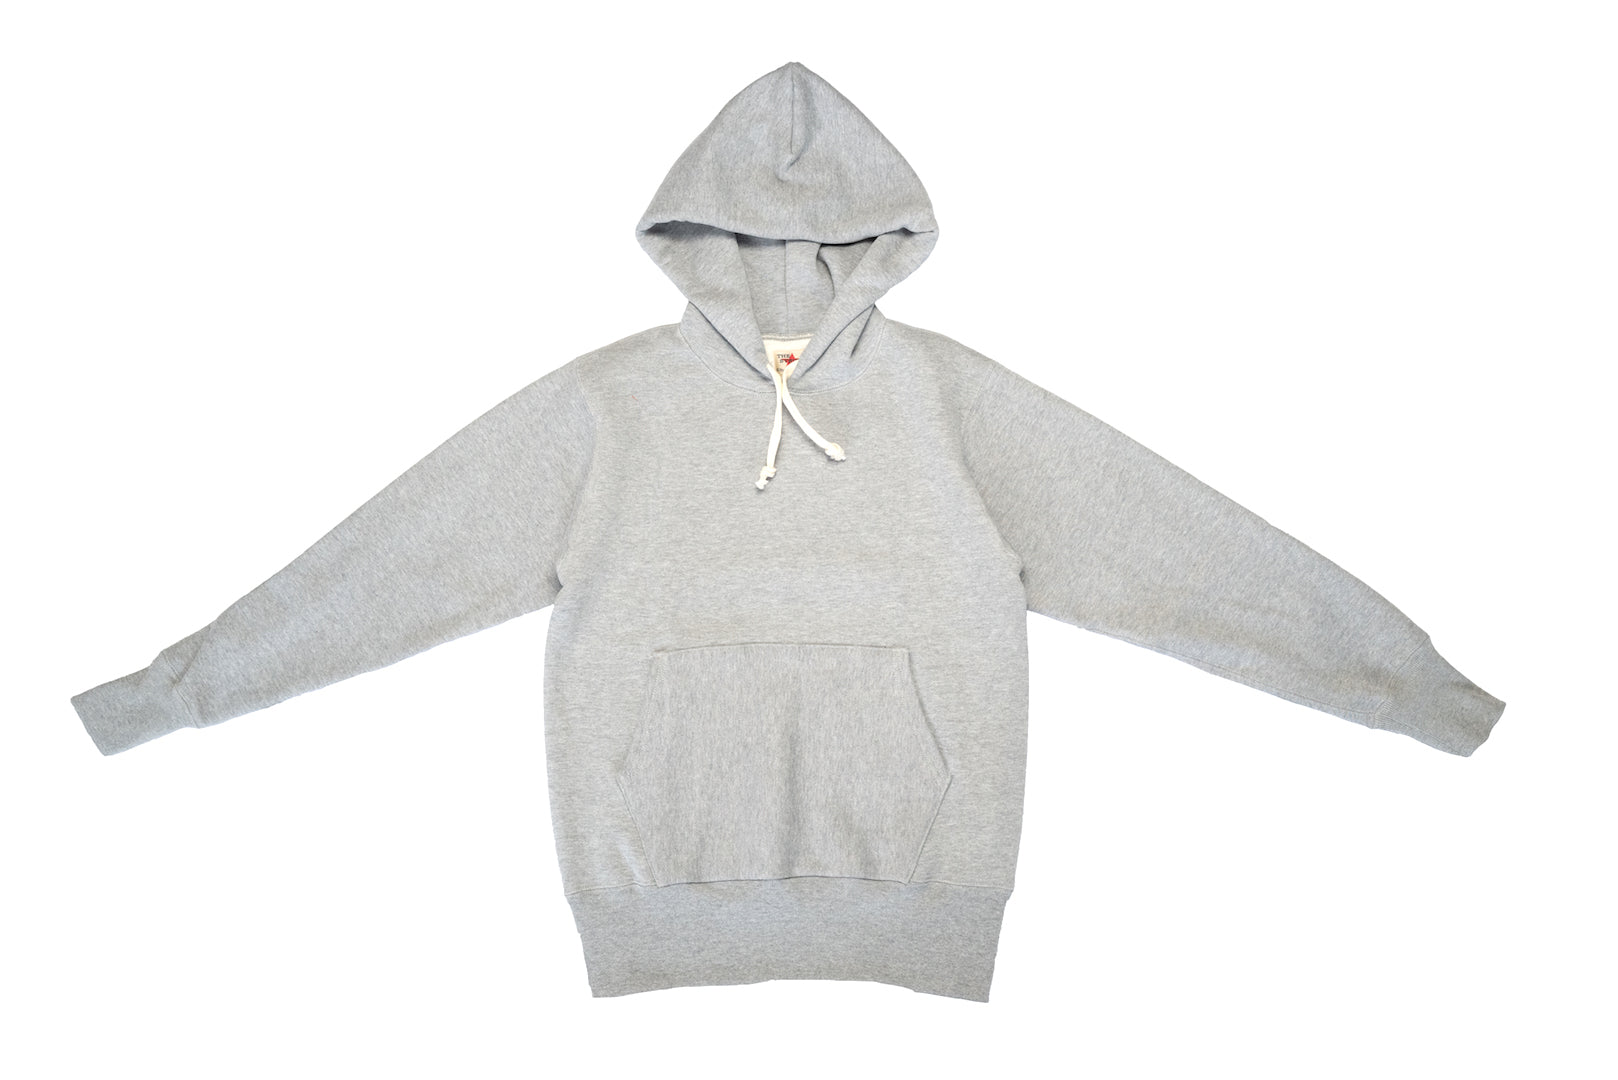 The Strike Gold x CORLECTION 12oz Loopwheeled Pull Over (Grey)